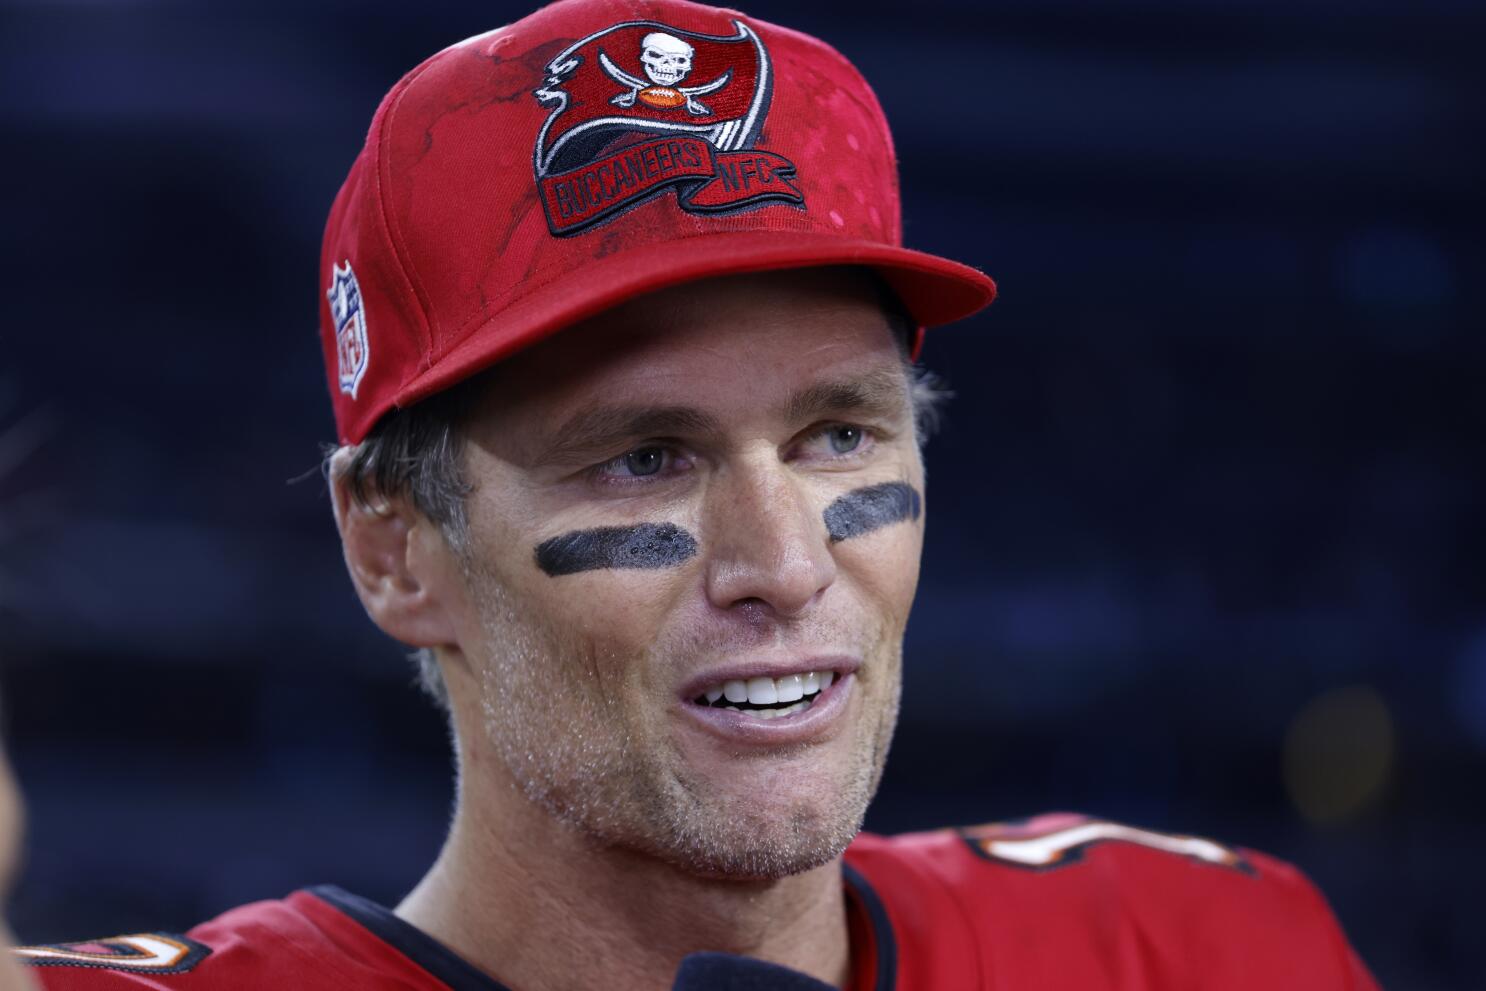 Tom Brady, the face of the Washington Nationals? Say what?